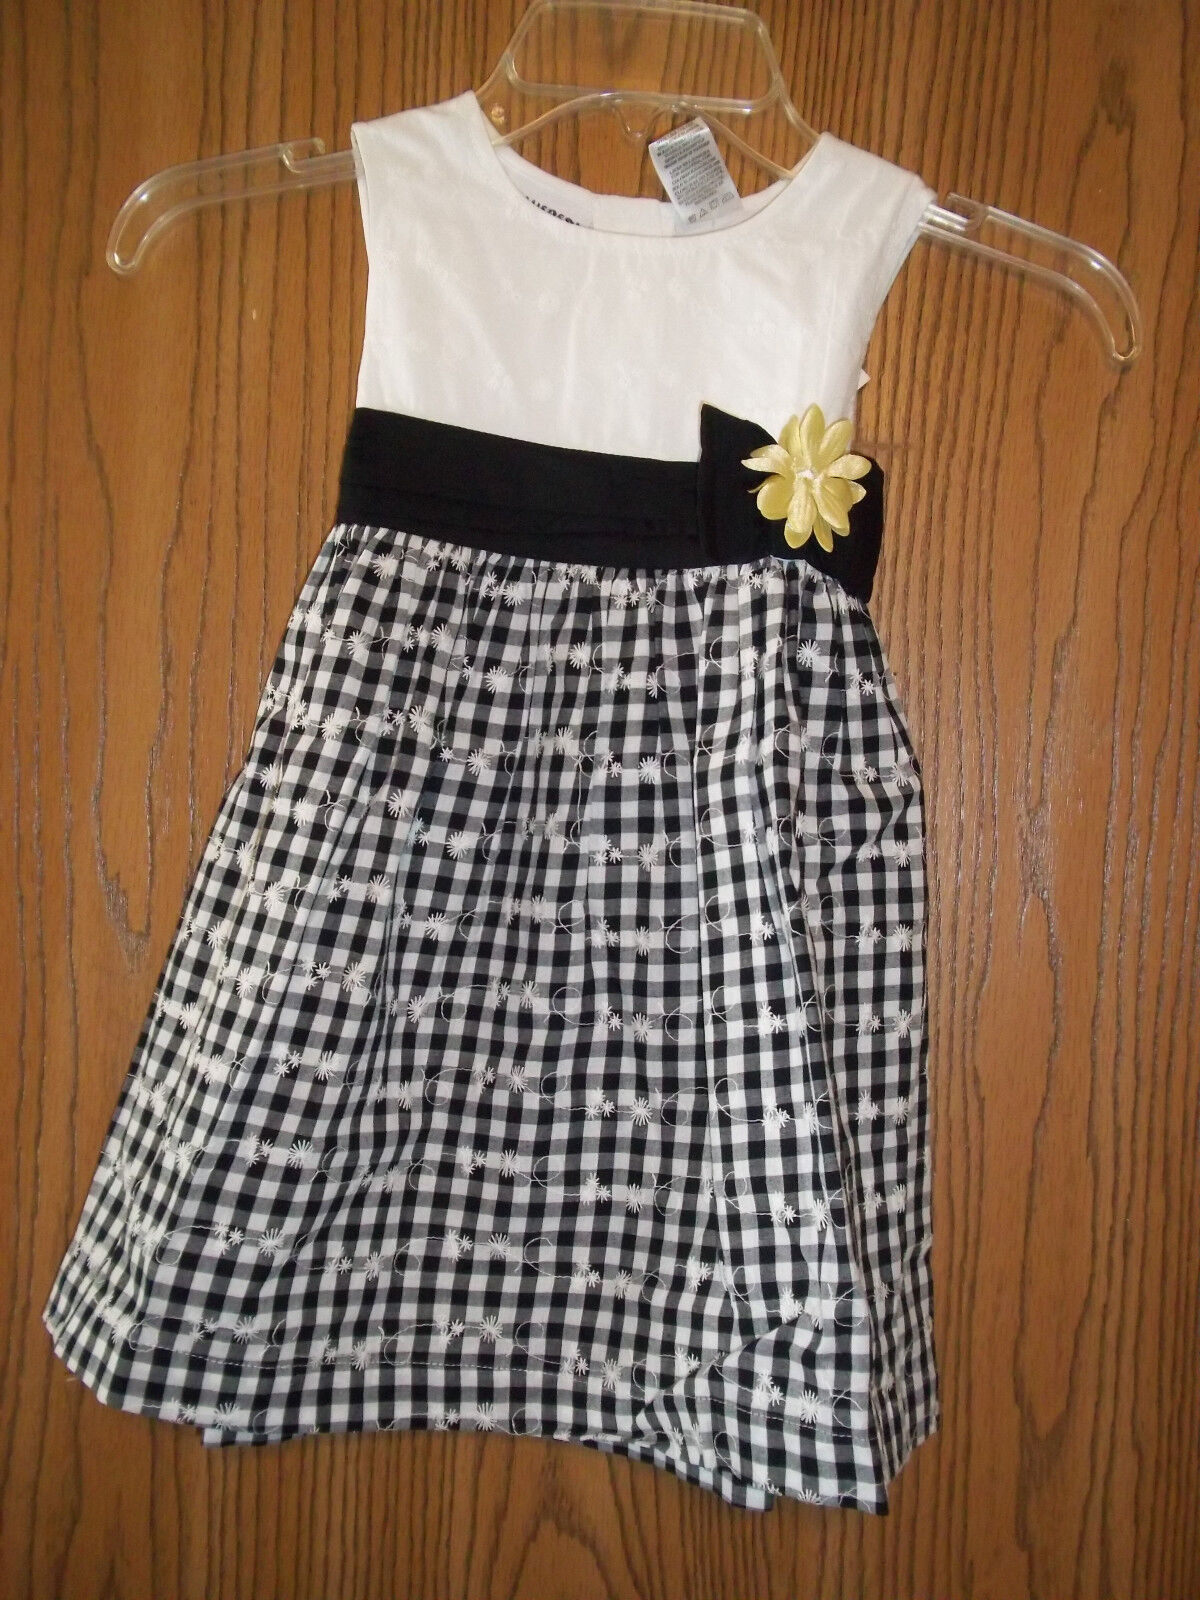 Blueberi Boulevard Girls Size 4T Black White Gingham Dress New With Tags